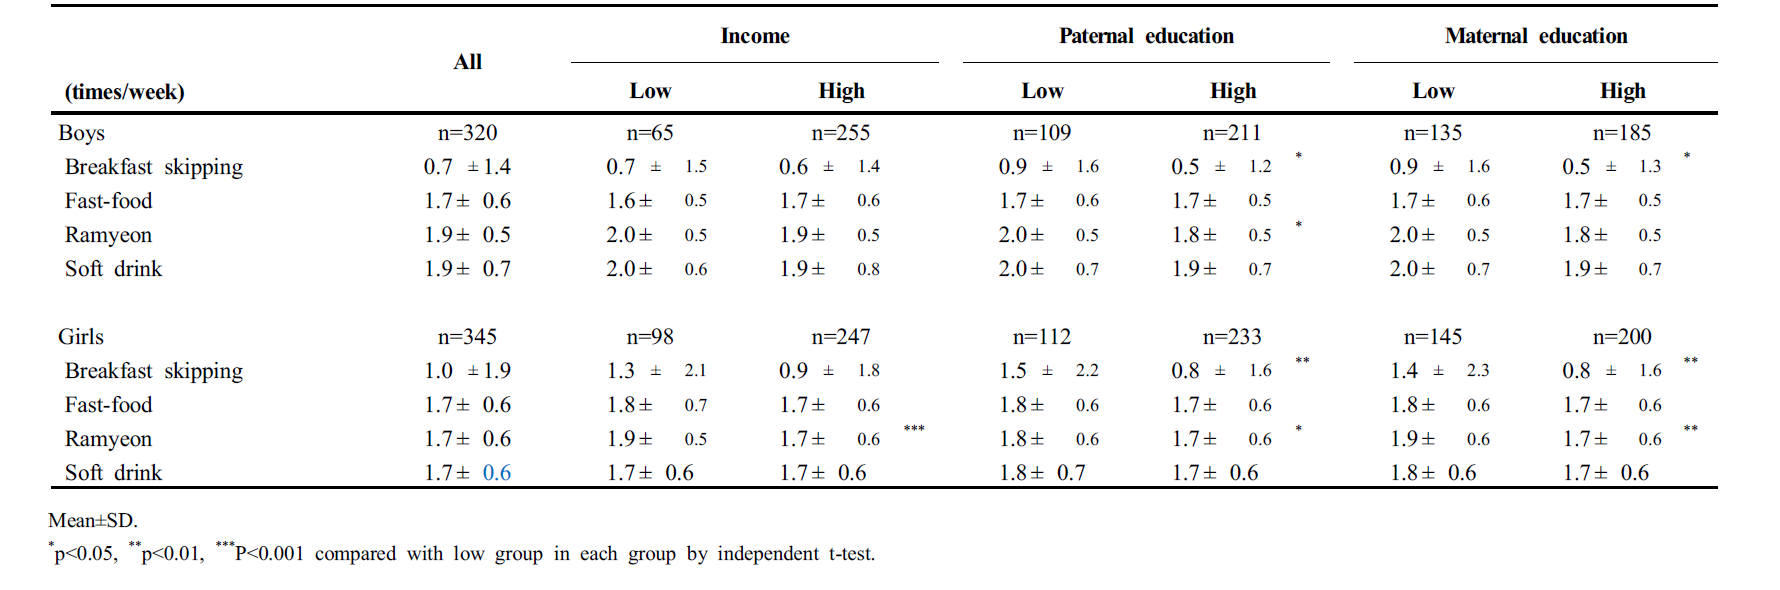 Eating habits score of the subject according to gender and socioeconomic states